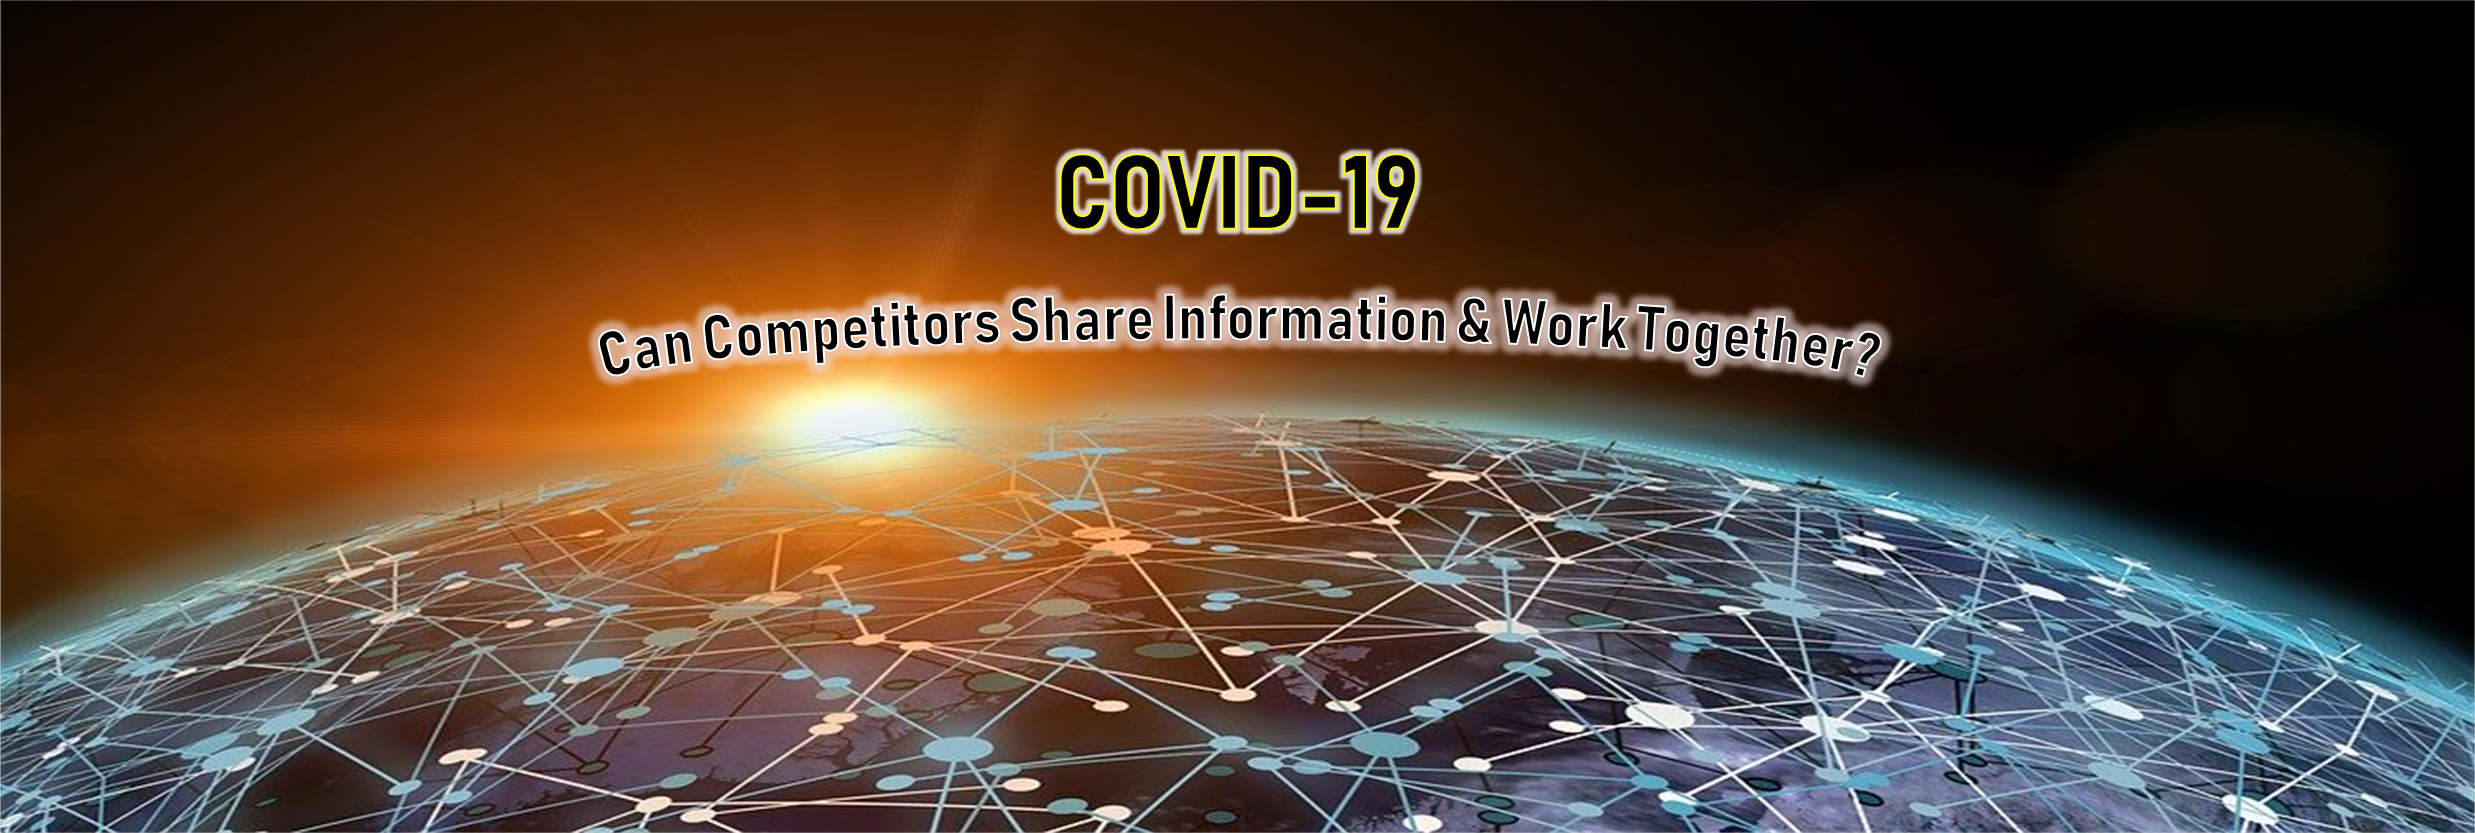 Can competitors share information and work together  during the COVID-19 outbreak?